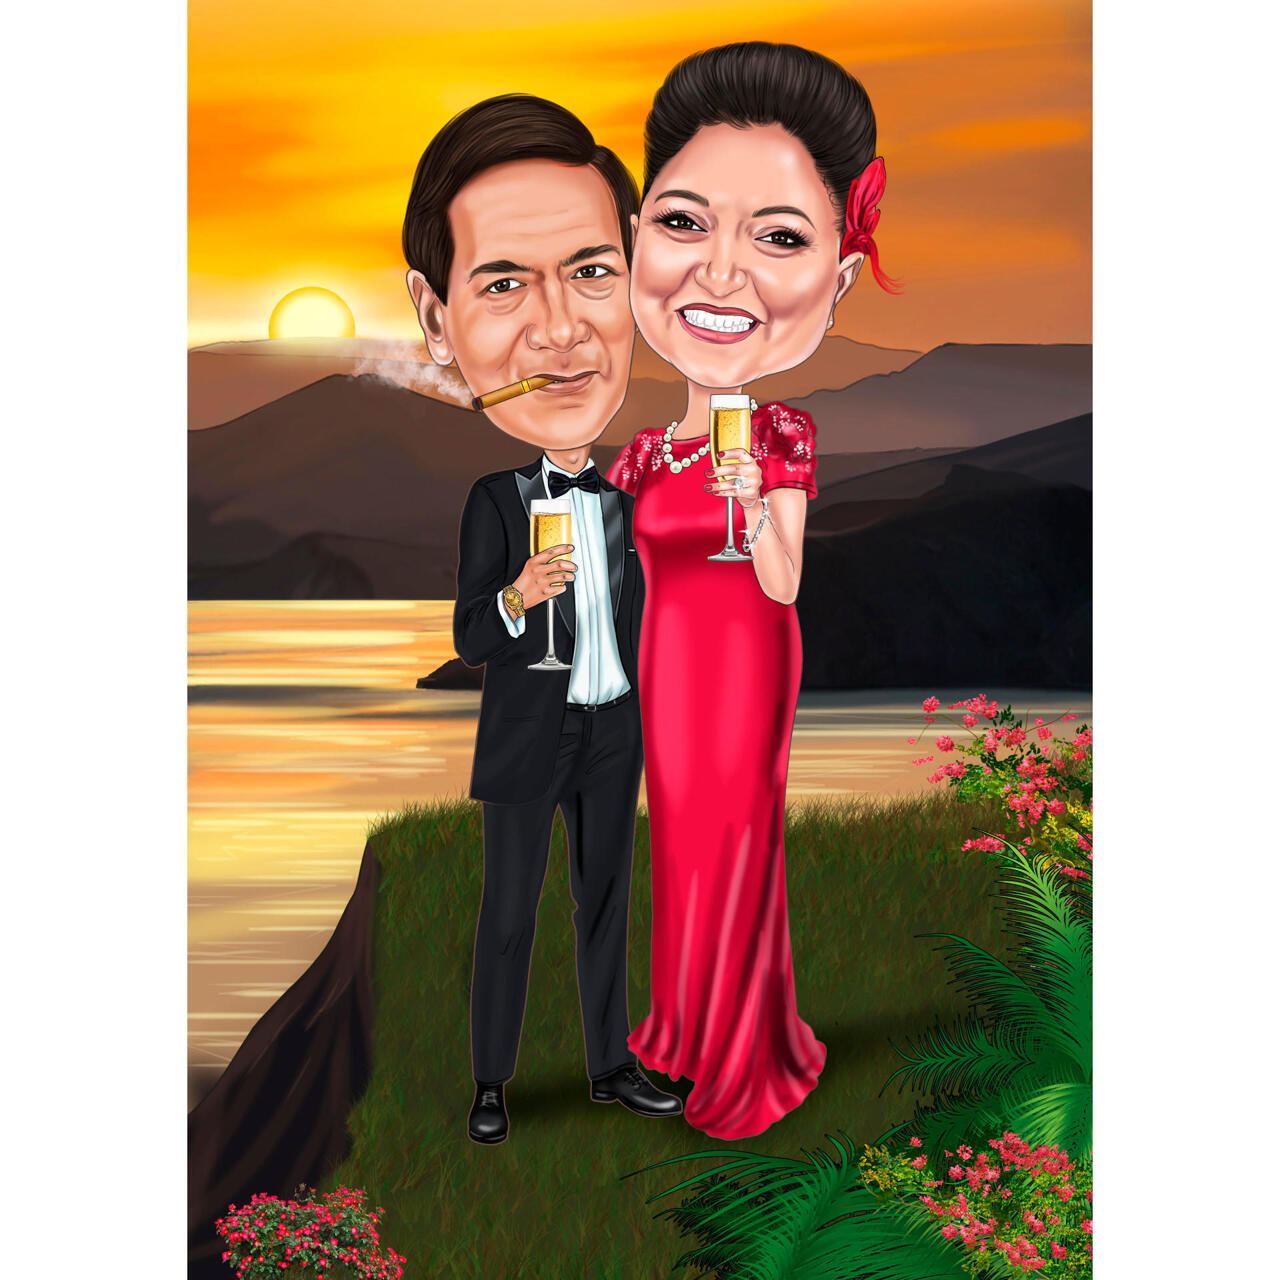 Giftsoffluv personalized caricature gifts with photo and message on Wooden  Stand, Gifts for Him, Her, Birthday, Anniversary,Wedding gifts, Special  Occasion, Acrylic - 8x3 inch 019 : Amazon.in: Home & Kitchen